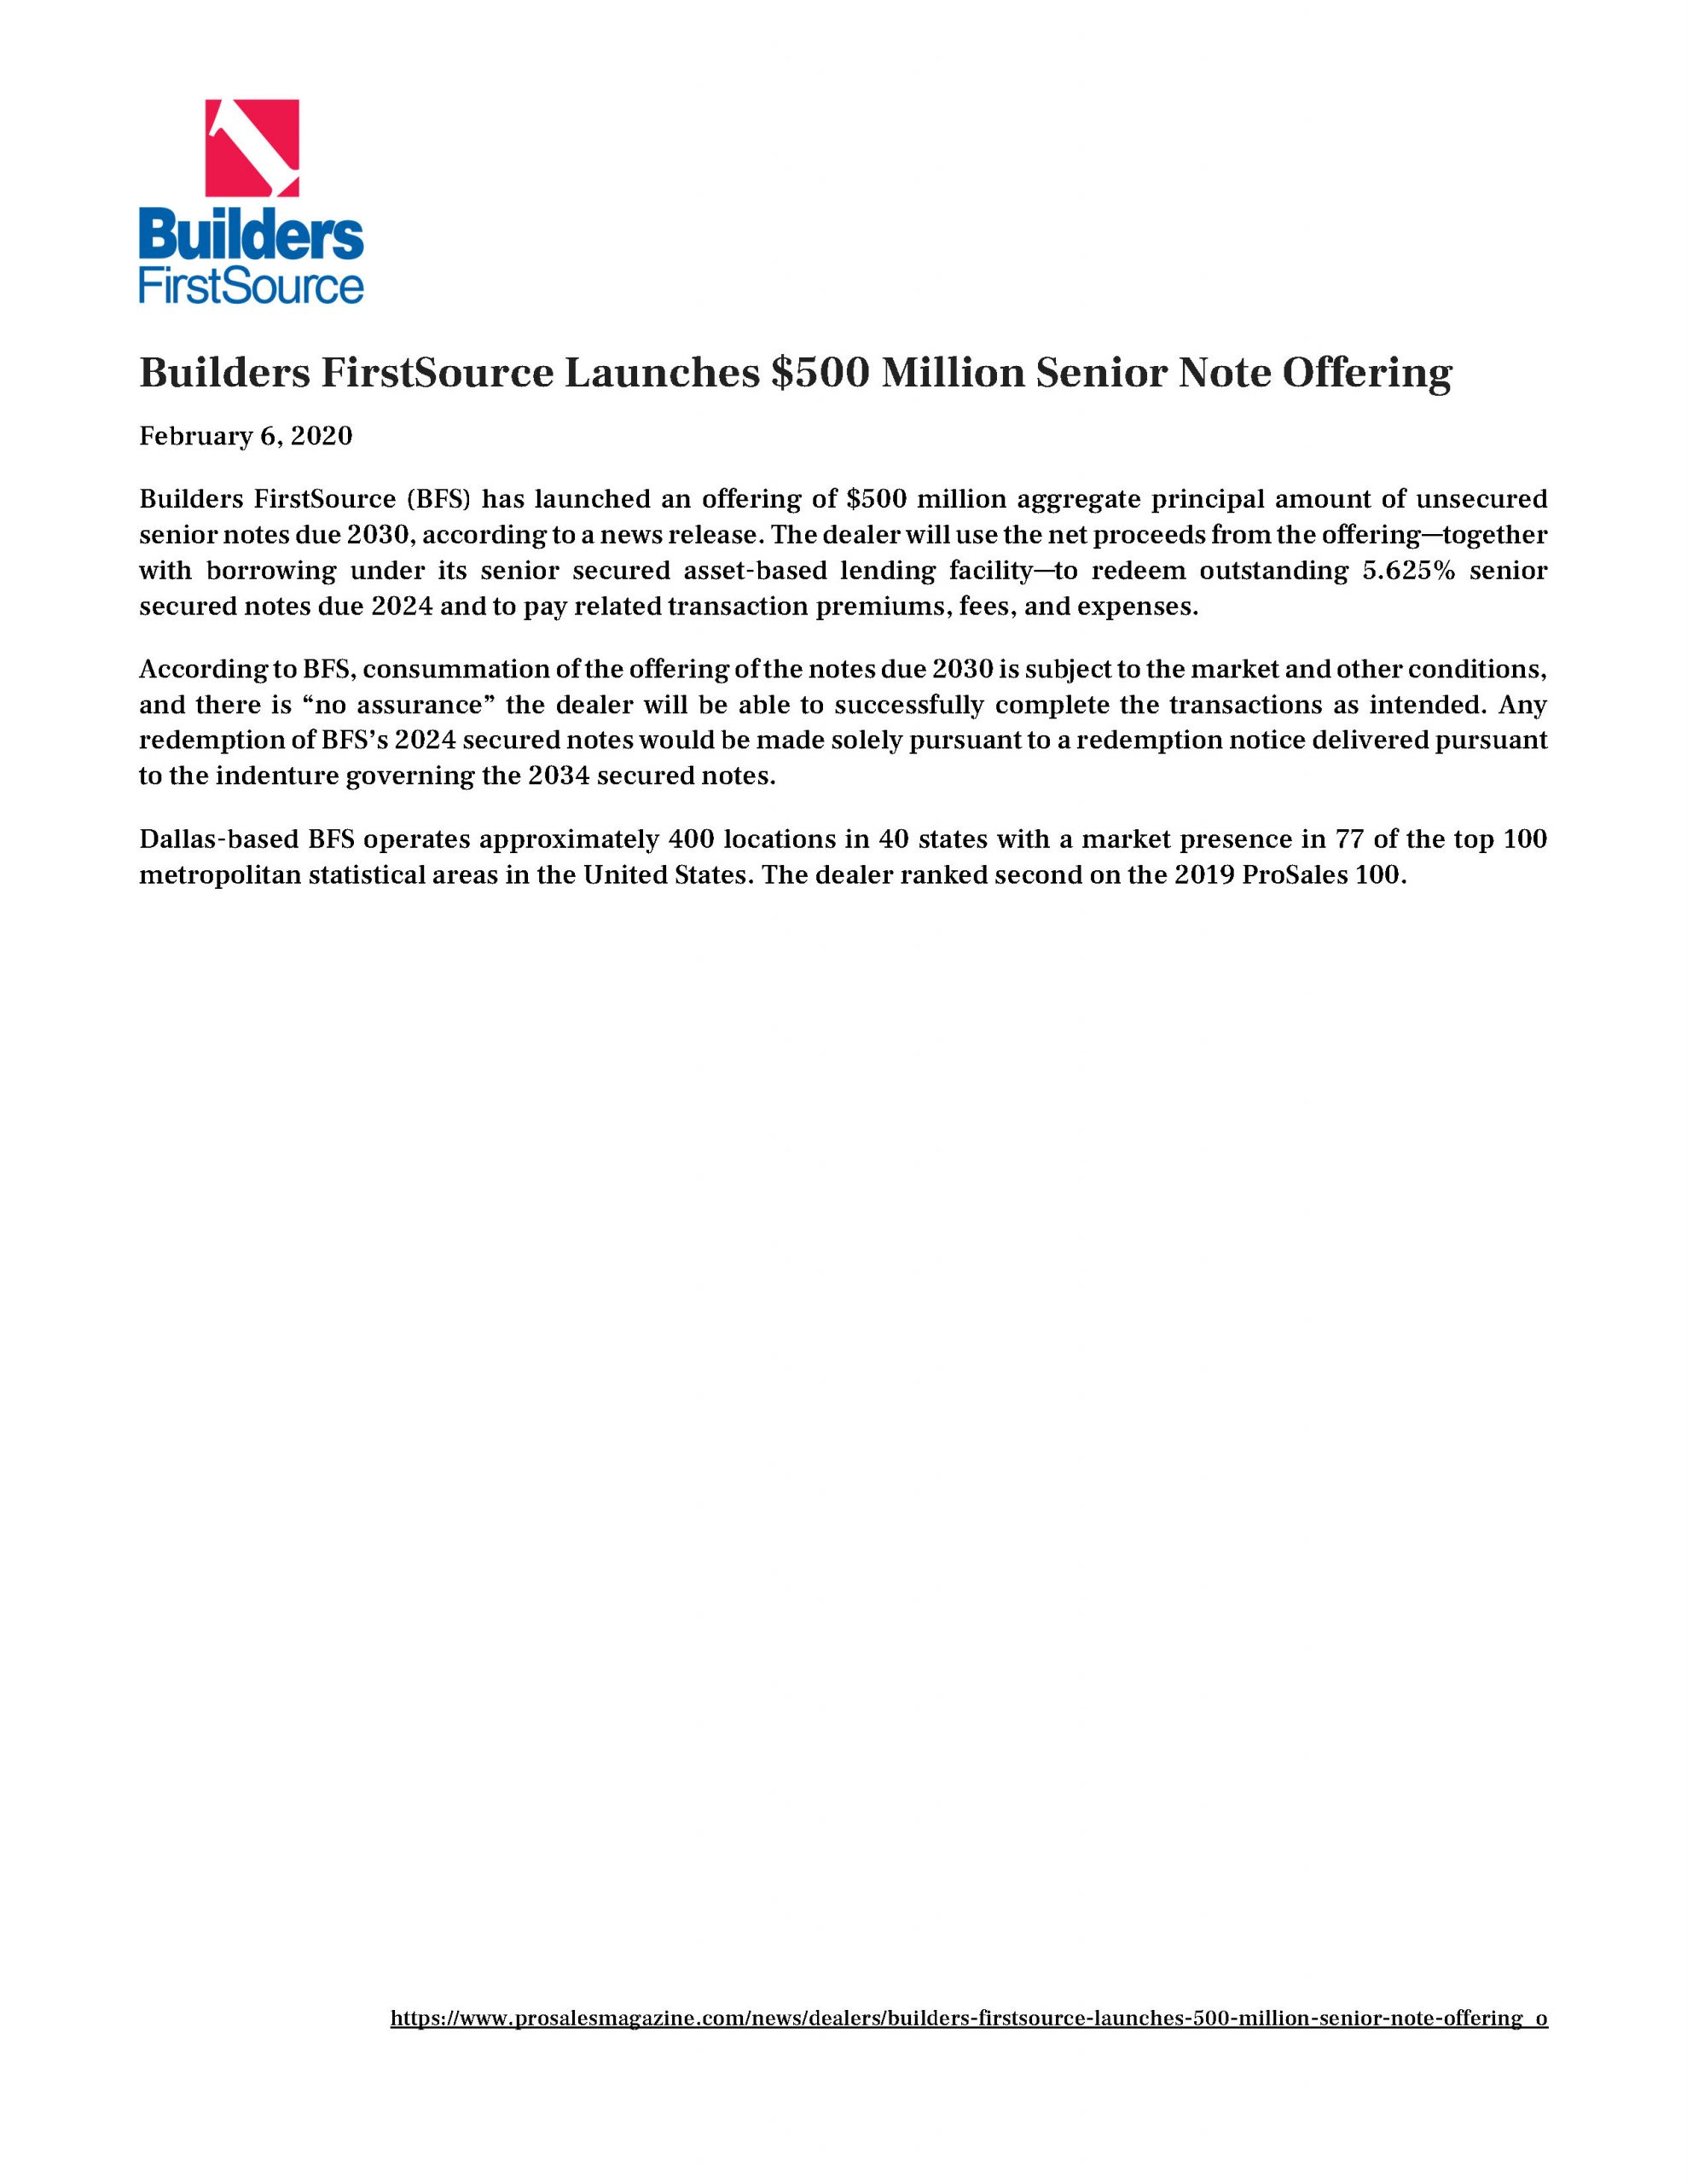 Builders FirstSource Launches $500 Million Senior Note Offering 2.6.2020